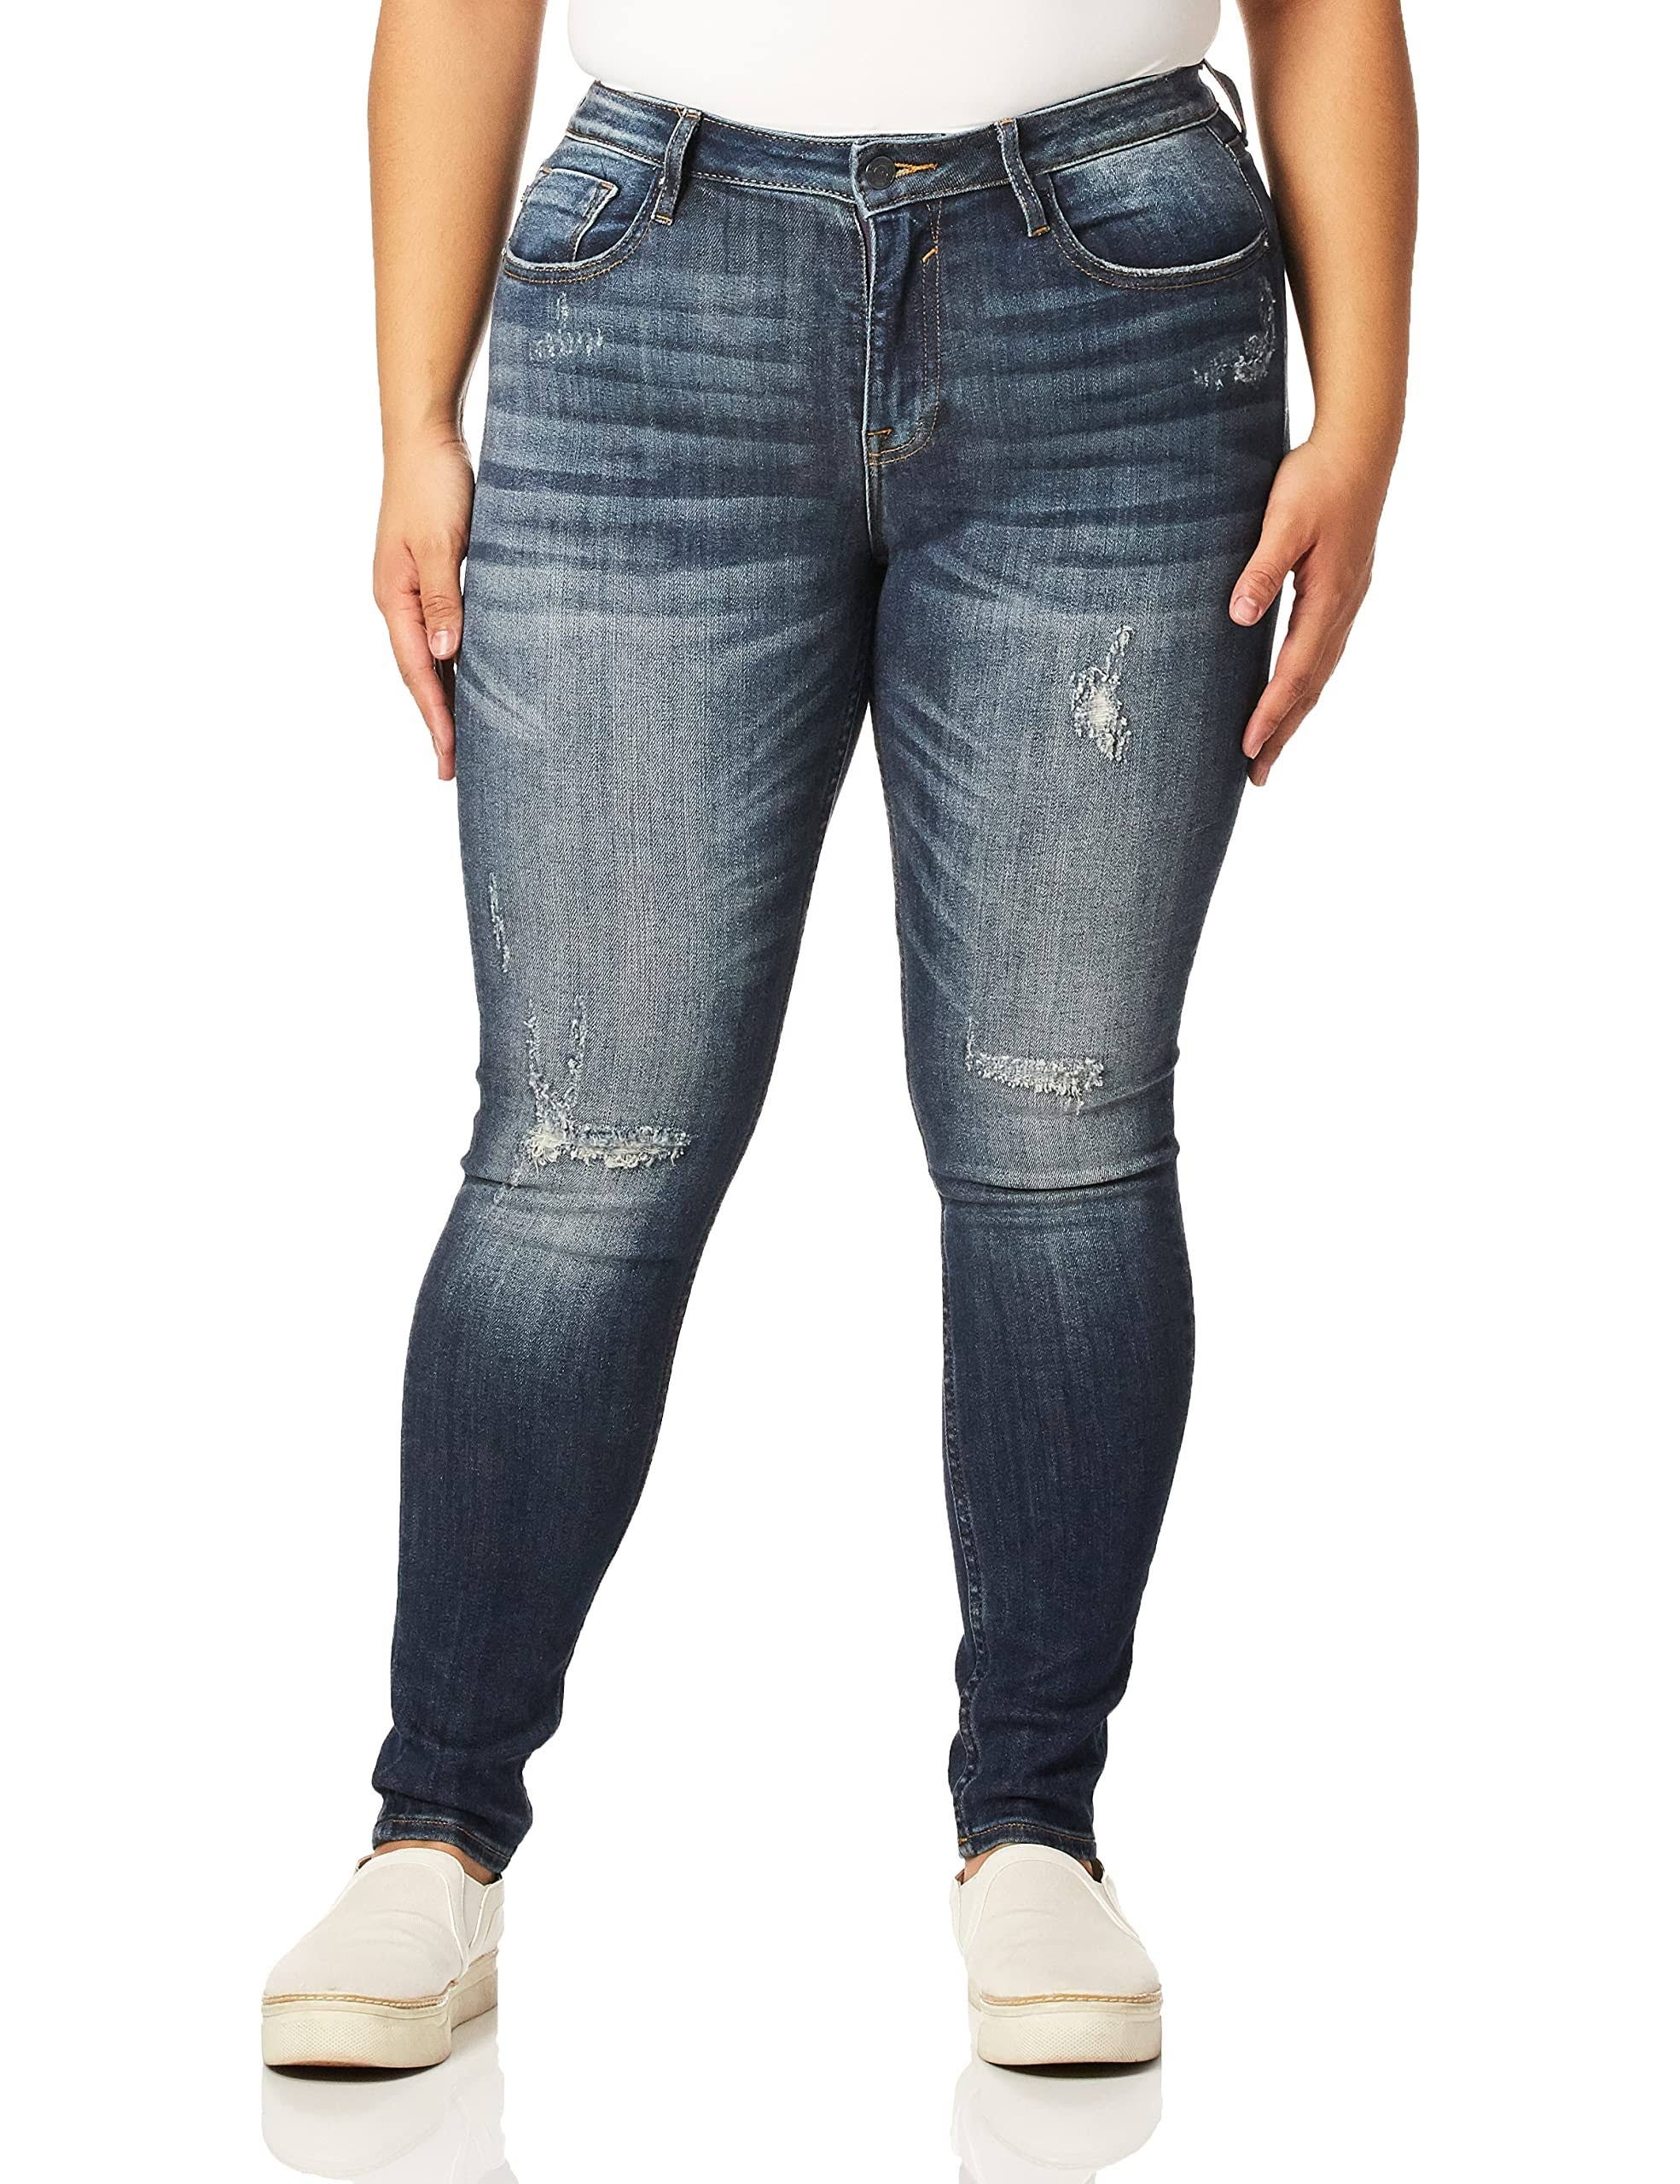 Comfortable Dark Blue Ripped Skinny Jeans for Women | Image